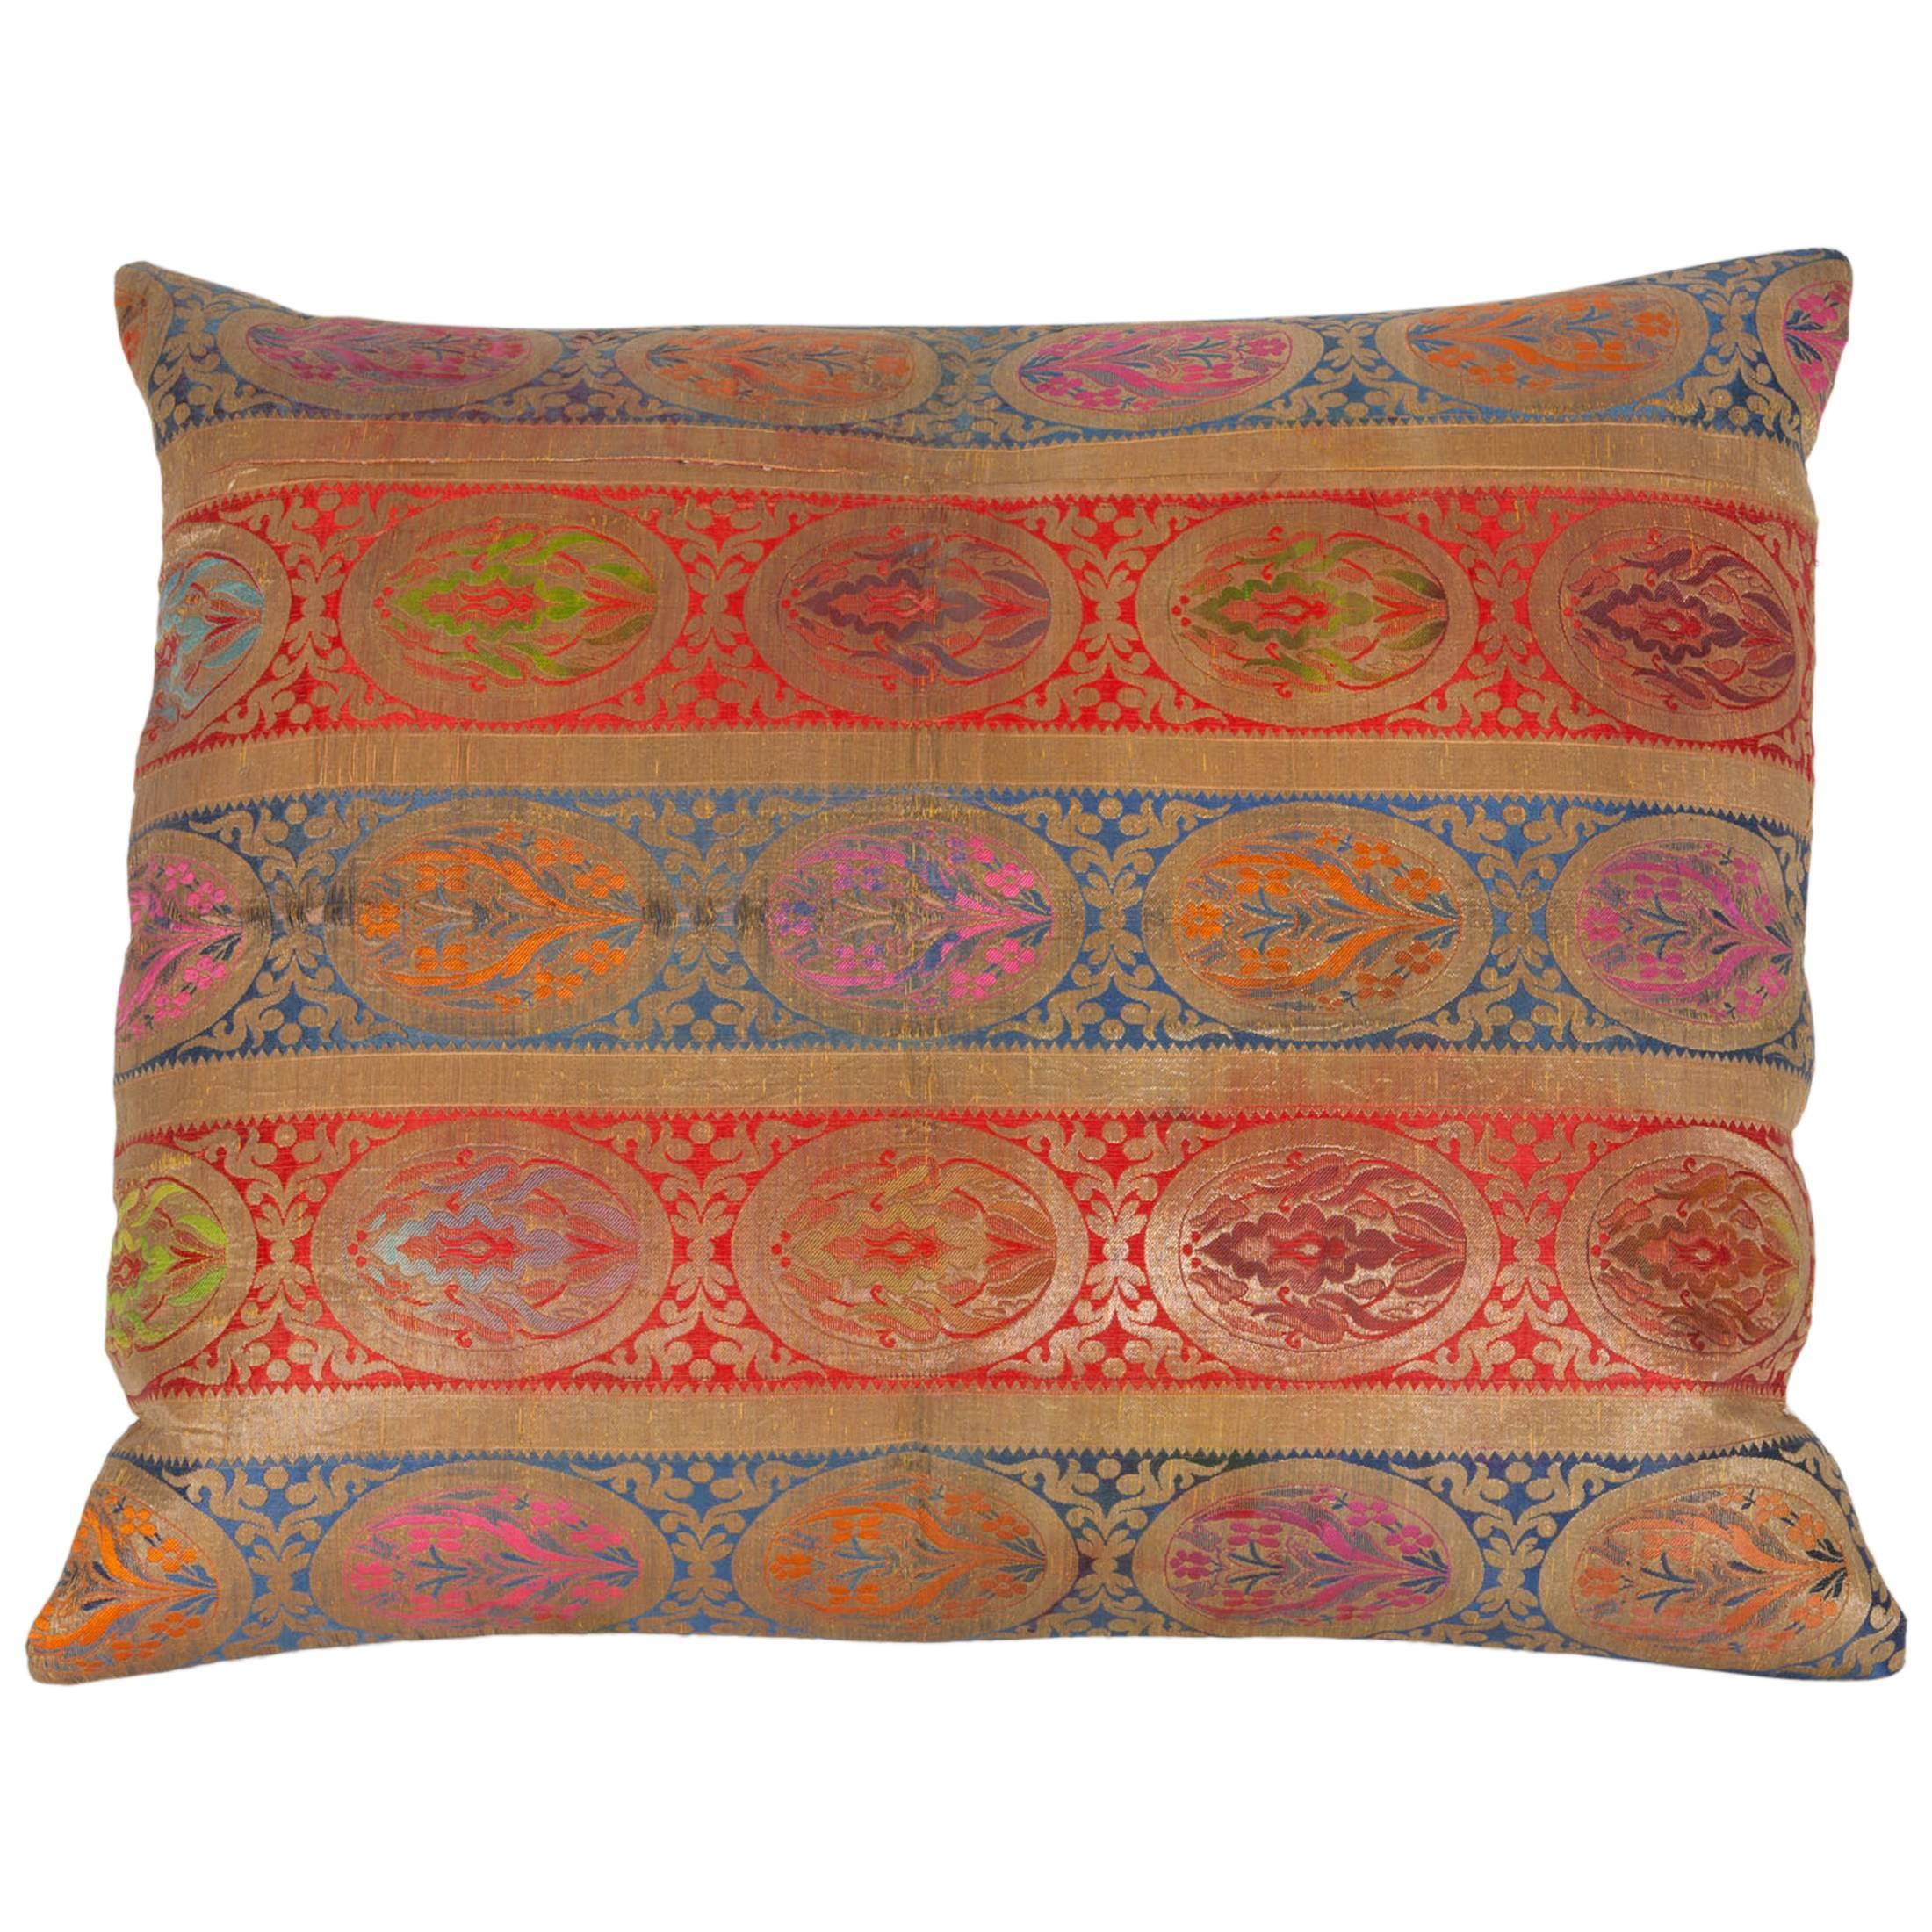 Early 20th Century Central Asian Brocaded Pillow For Sale